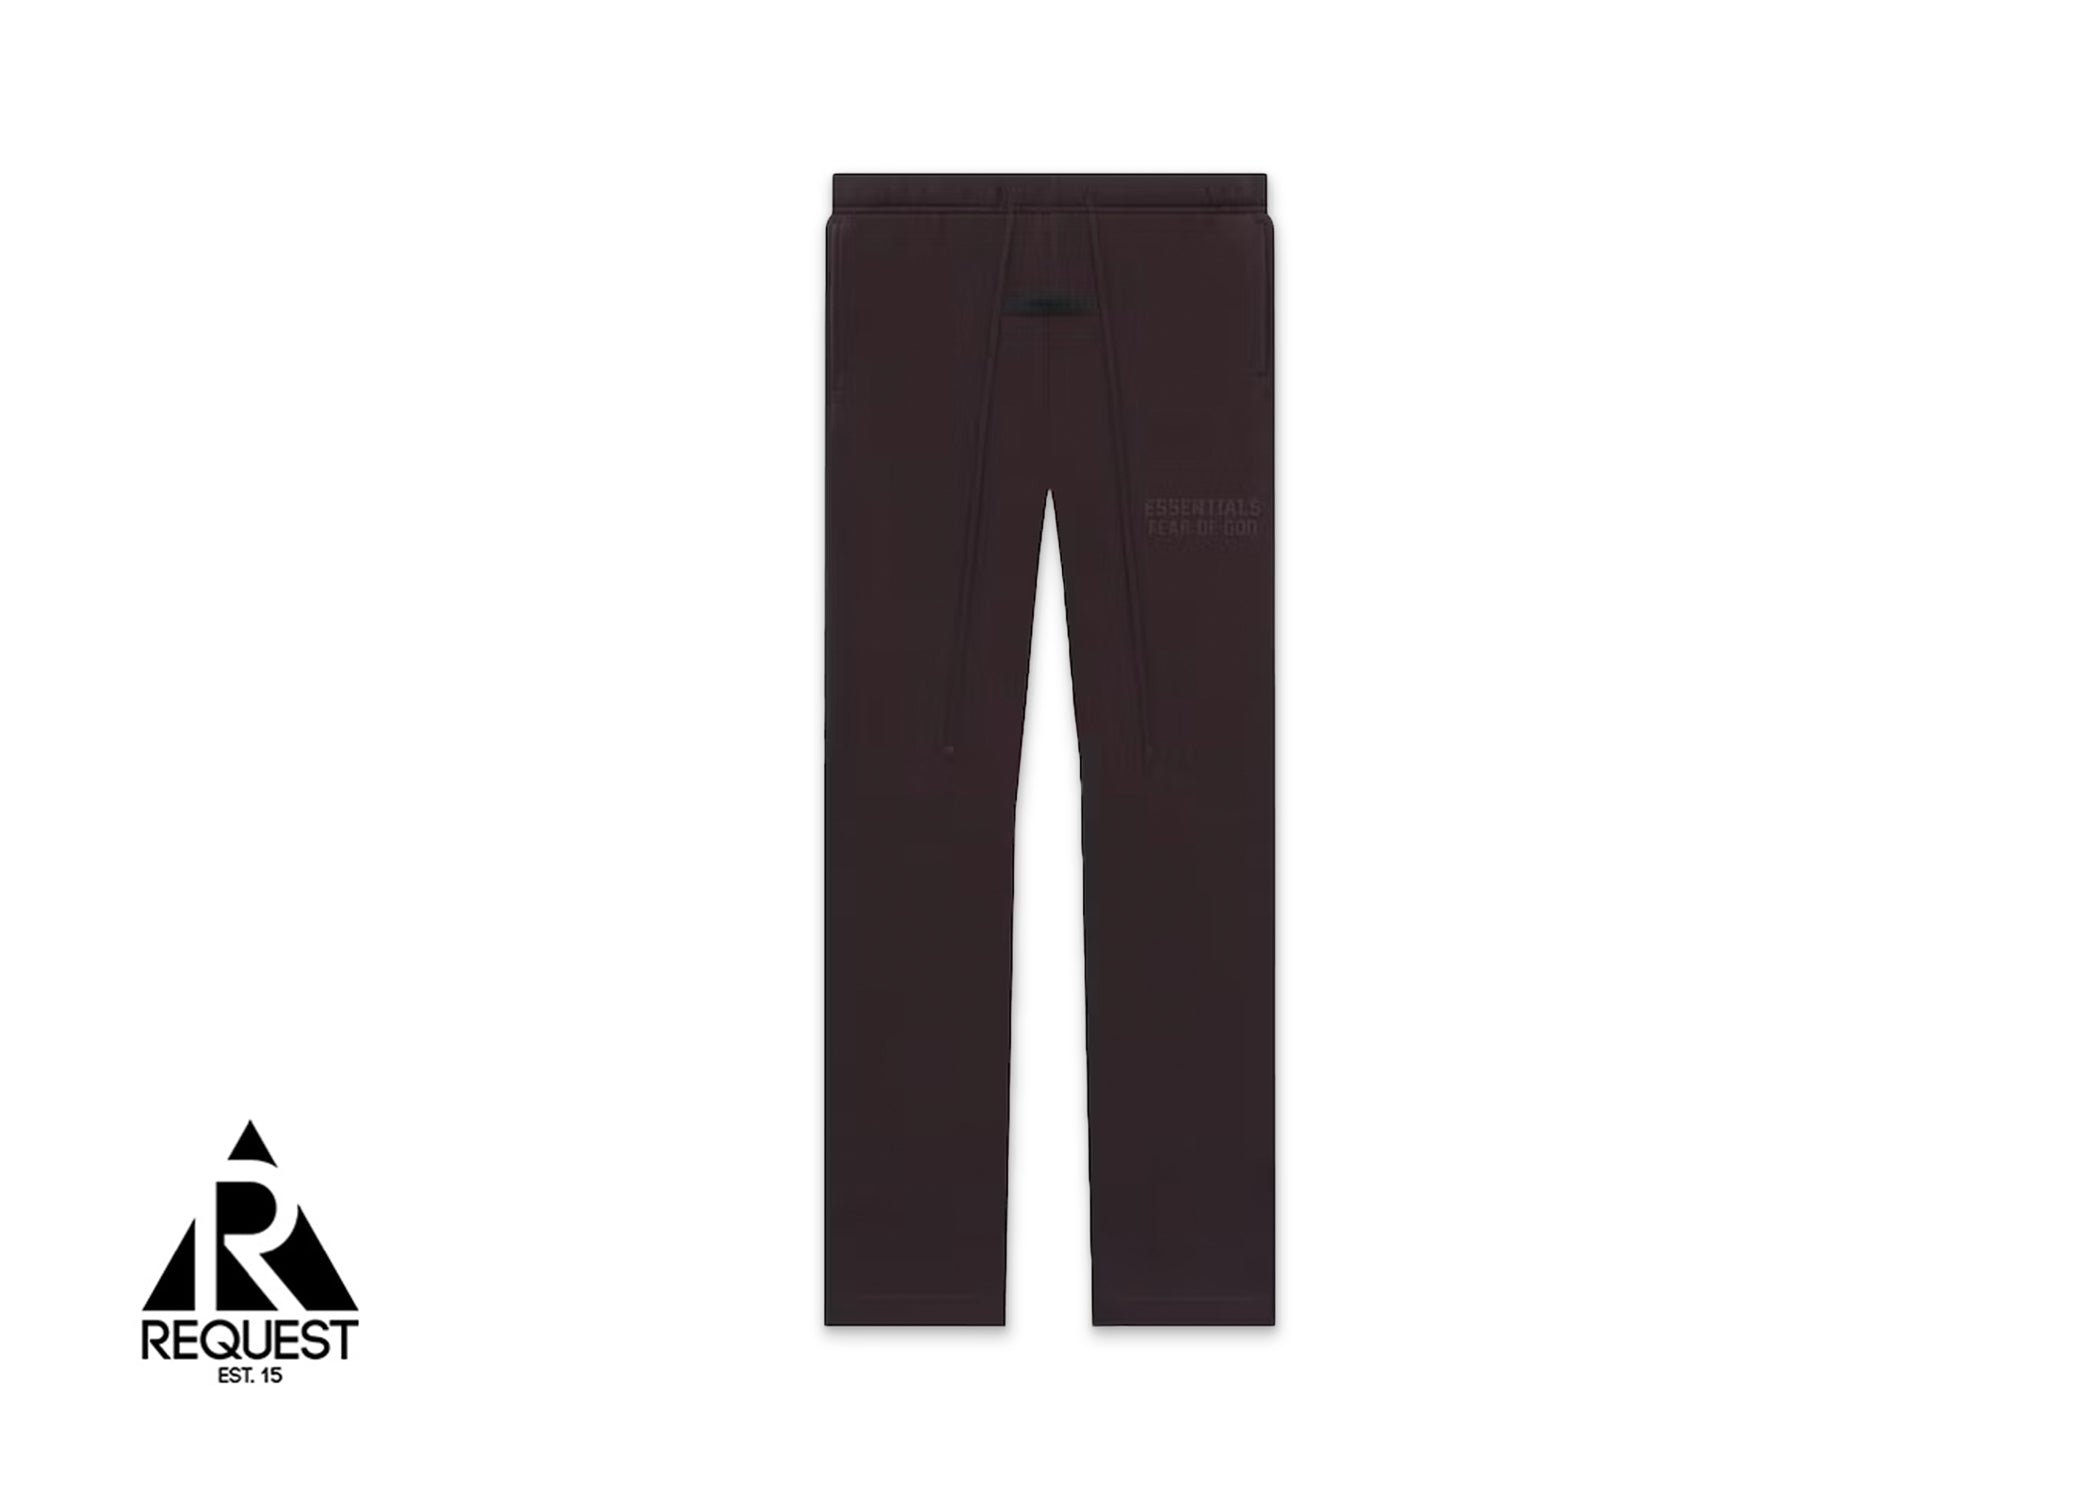 Fear of God Essentials Relaxed Sweatpants “Plum”